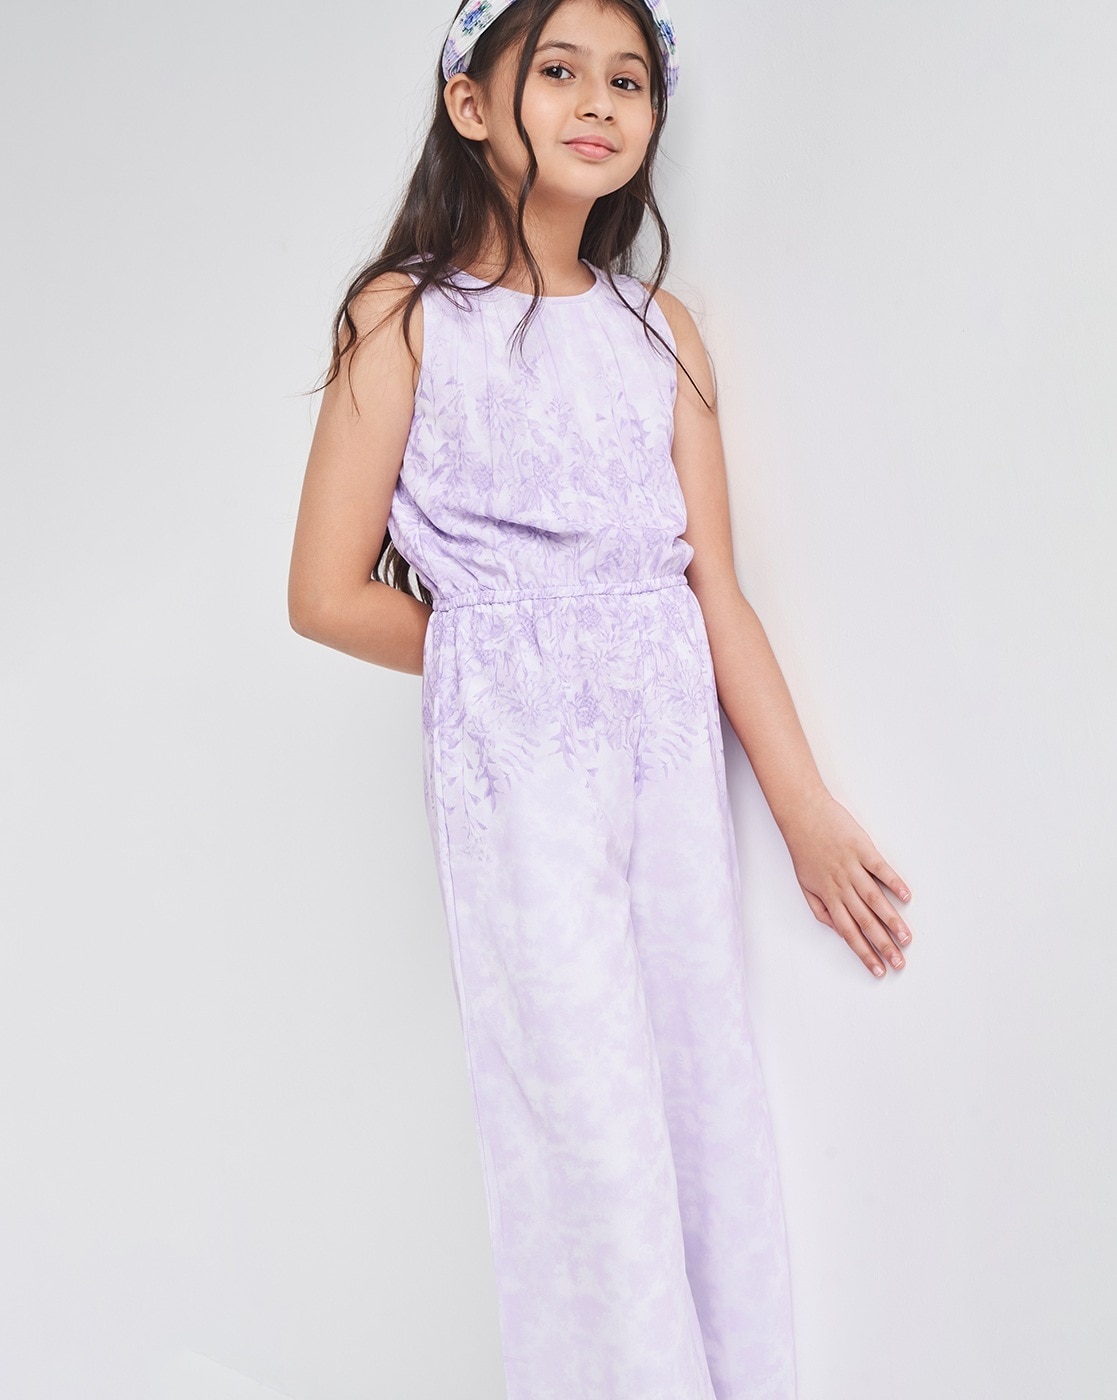 Girls Jumpsuit Price in India - Buy Girls Jumpsuit online at Shopsy.in